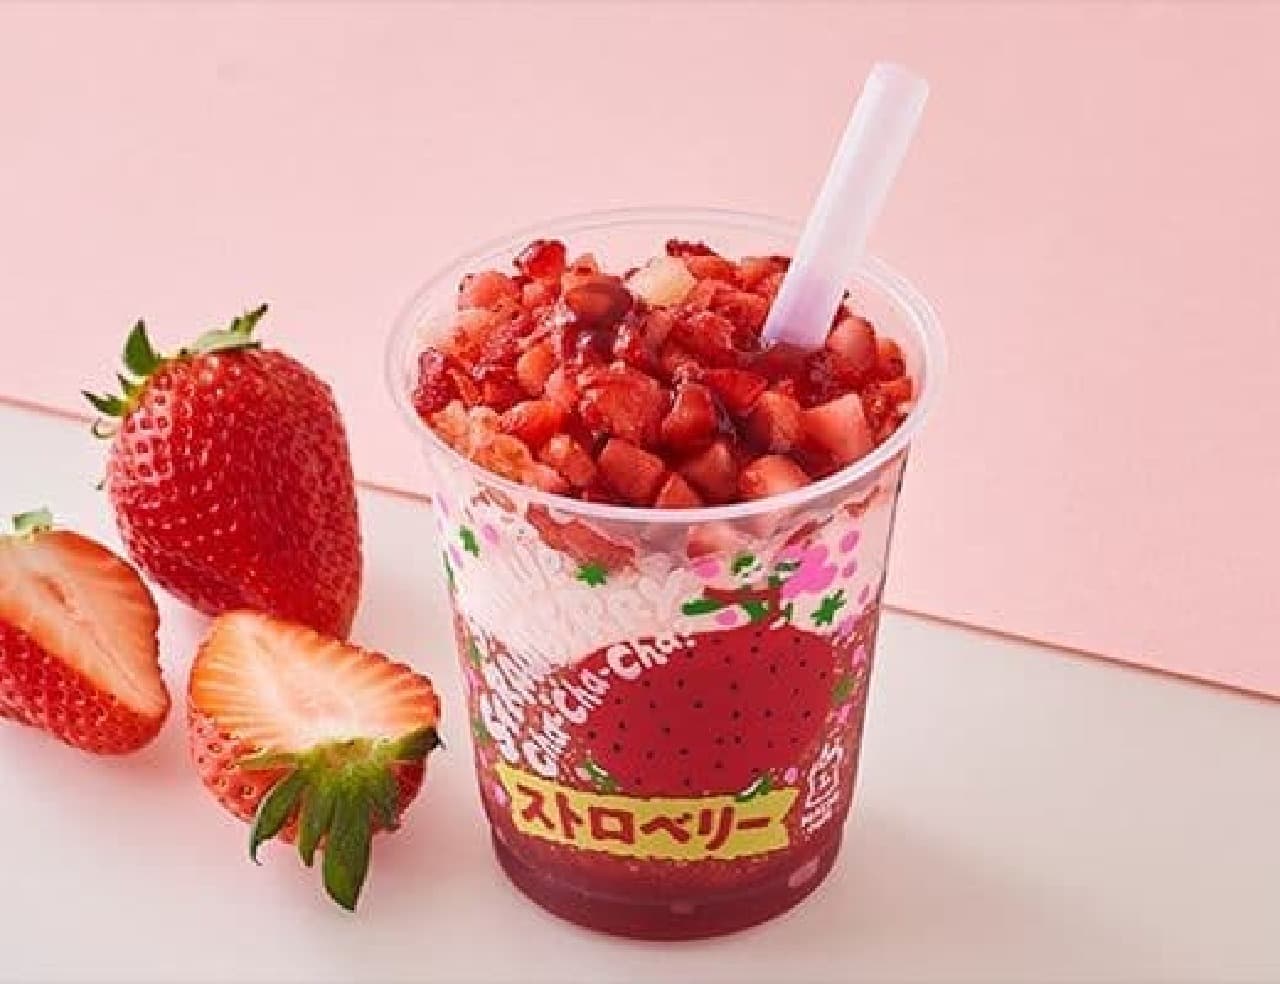 Lawson "Machi Cafe Frozen Party Strawberry 250g"